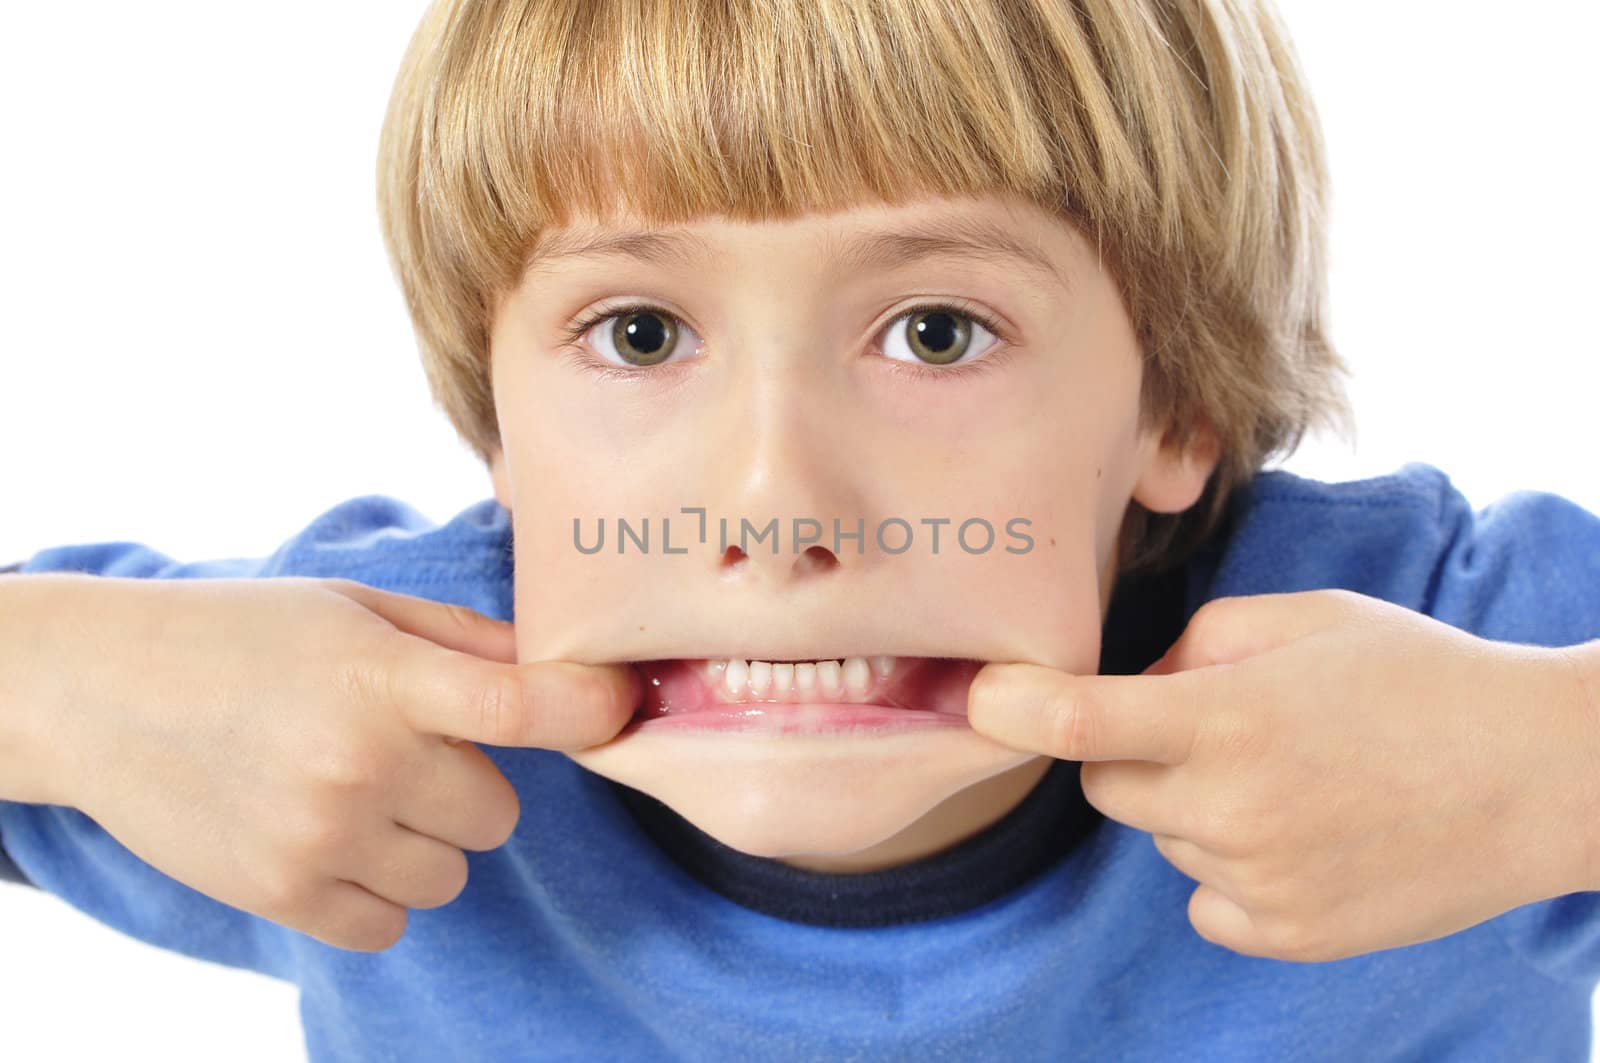 Young child making funny face by pulling mouth open shows bottom teeth